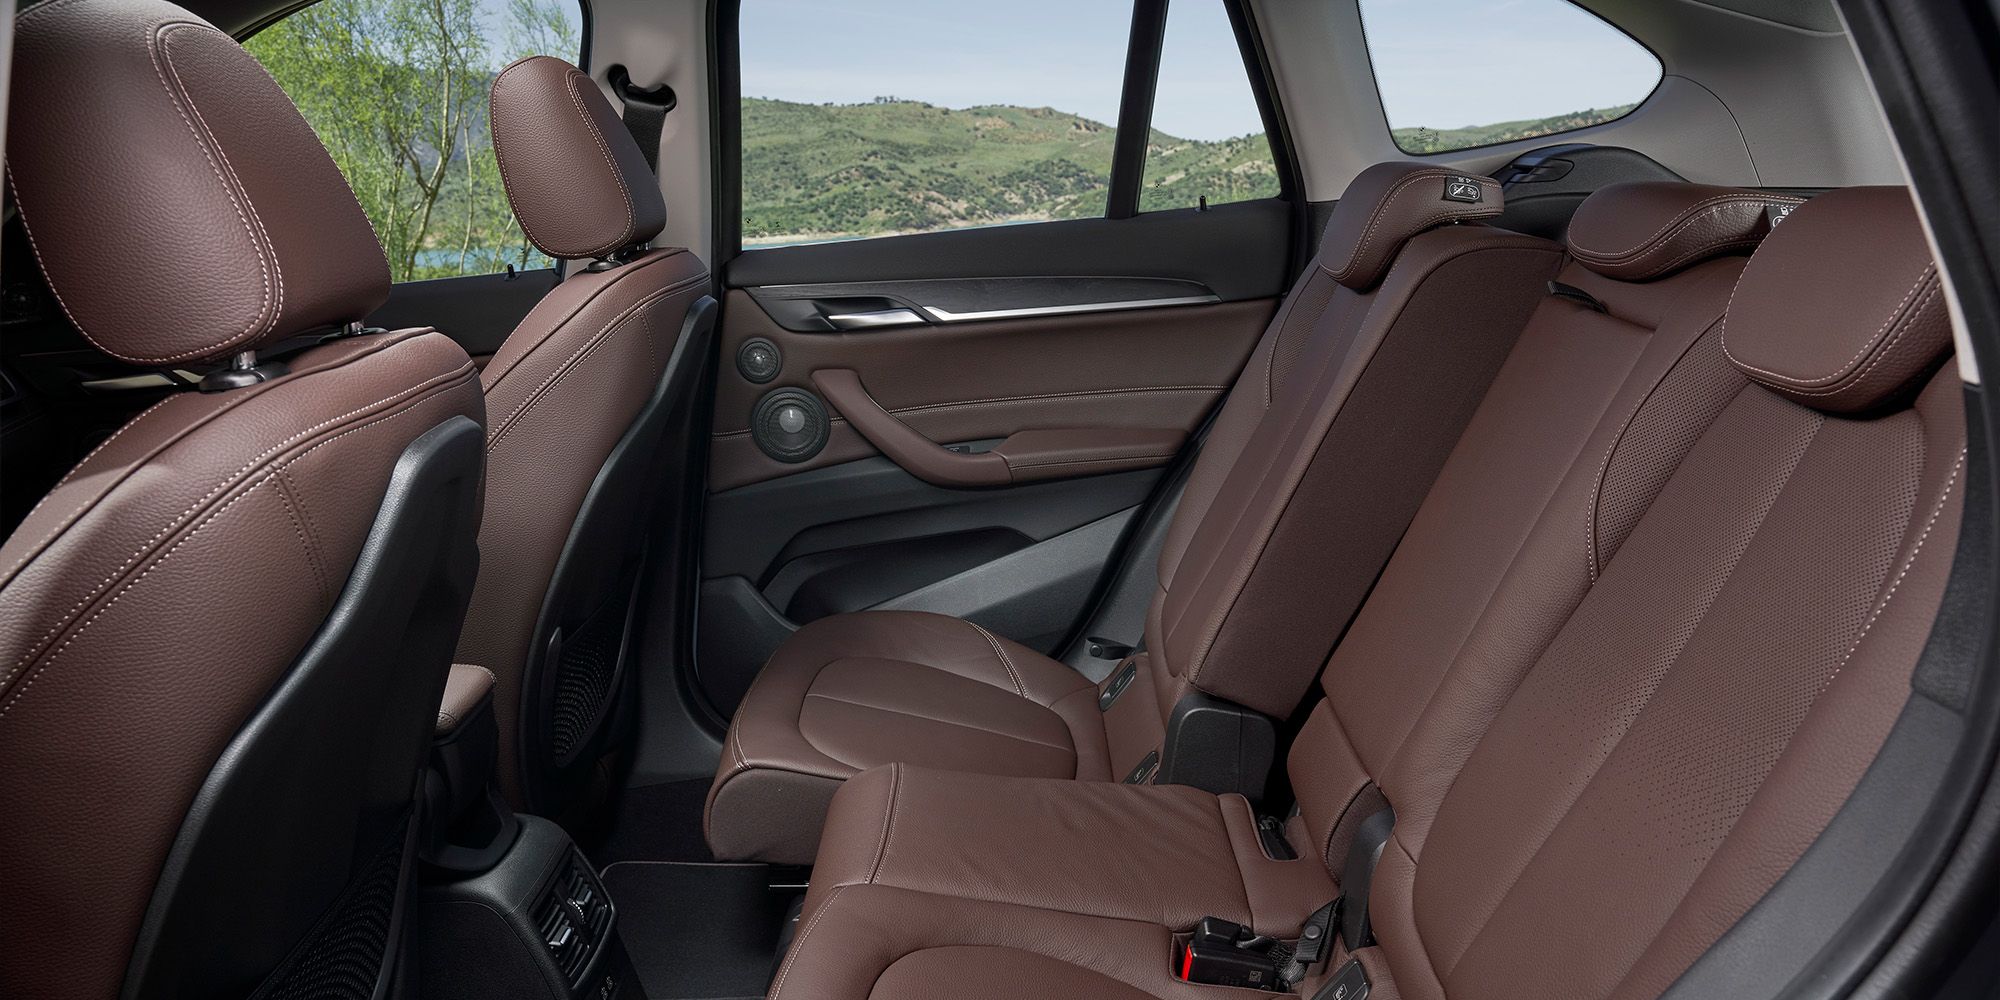 The rear seats in the X1